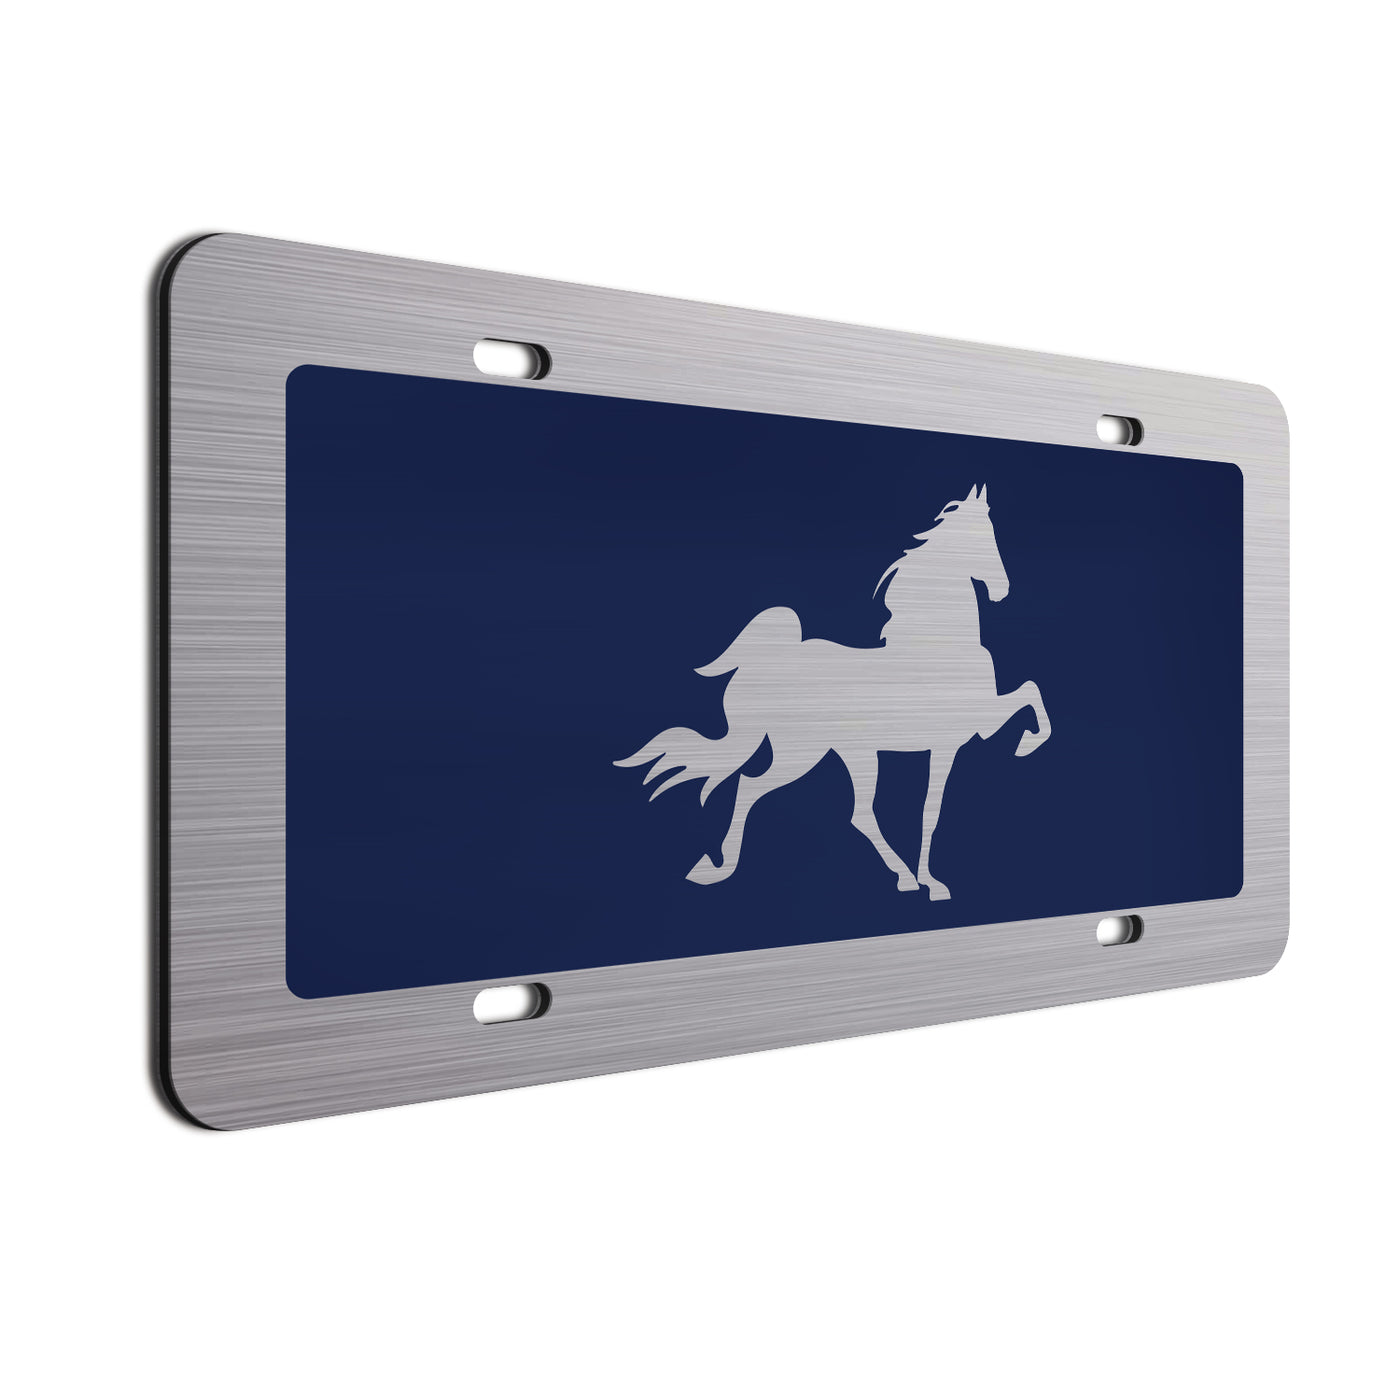  Horse Car License Plate Navy